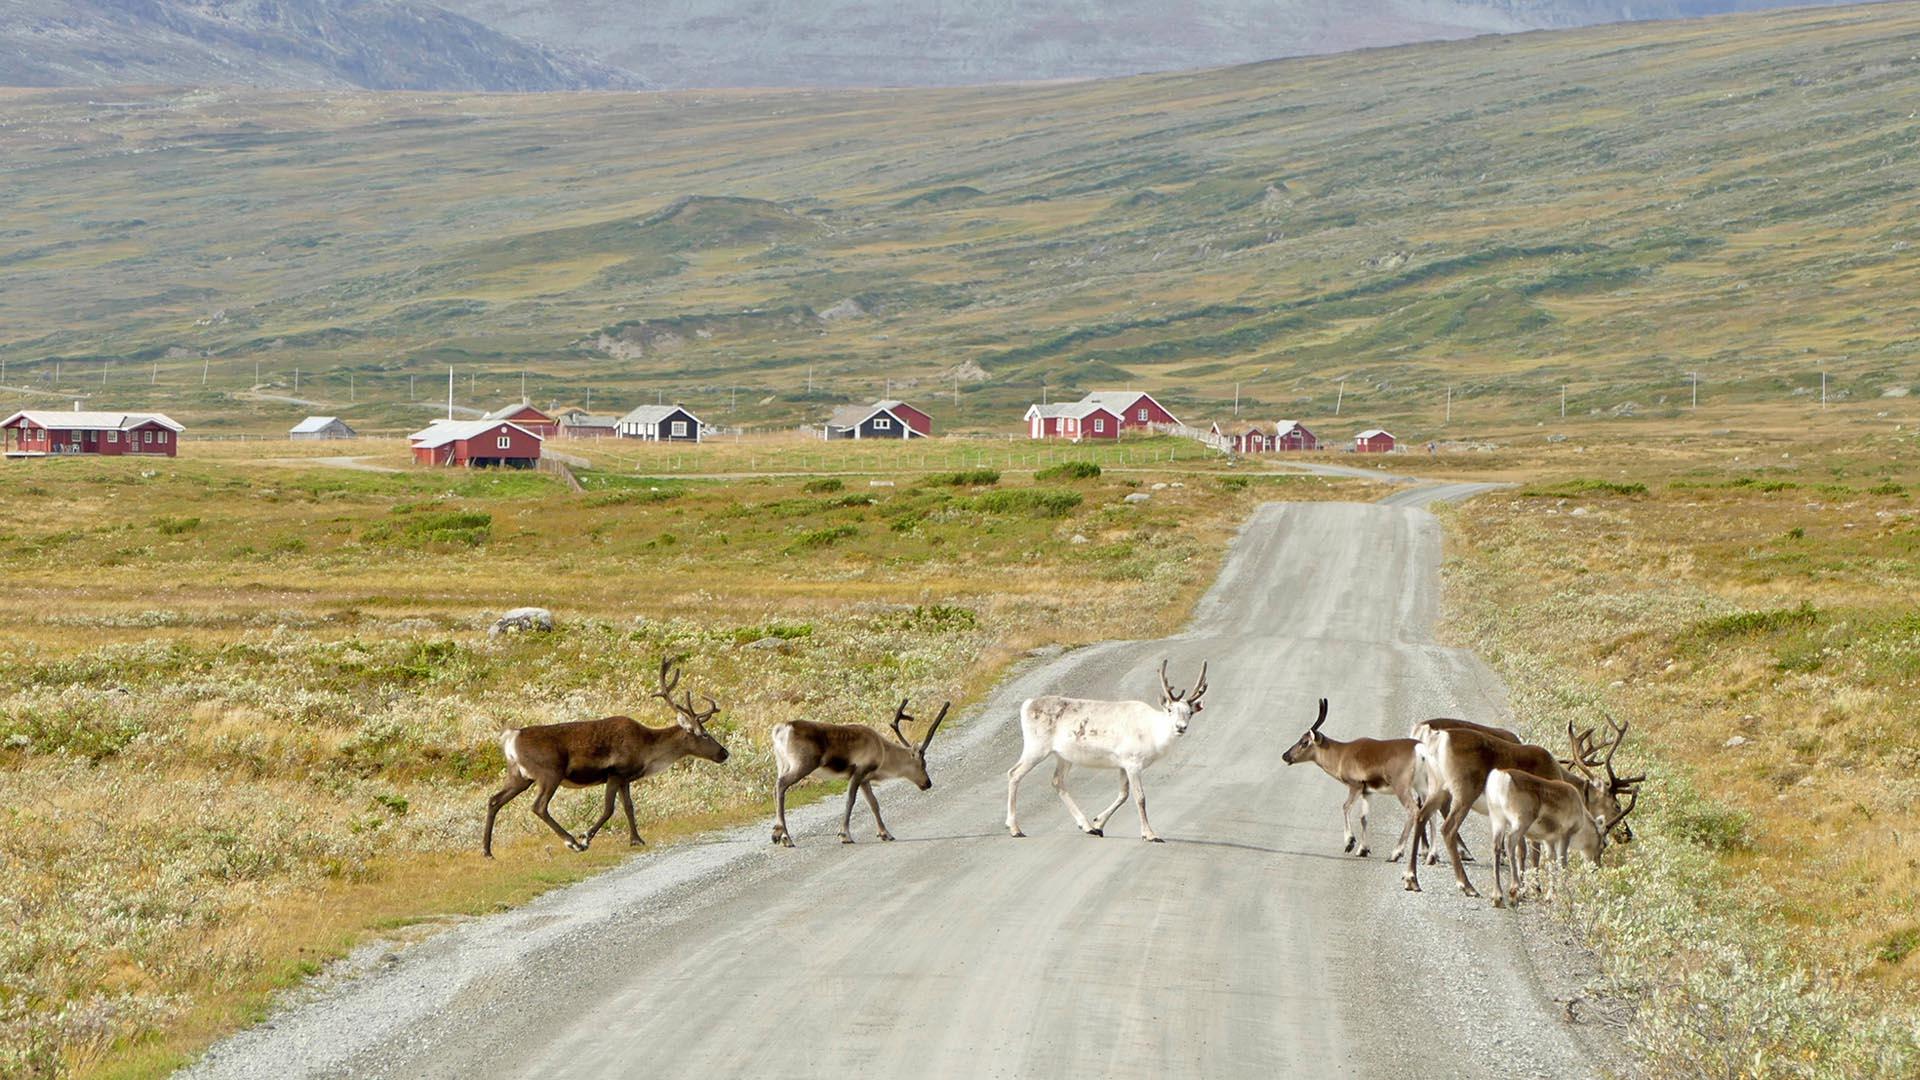 Reindeer cross a gravel road in the highlands. In the background, small red mountain farm huts can be seen. The landscape is treeless, and the vegetation on the vast hillsides is grass and low bushes.